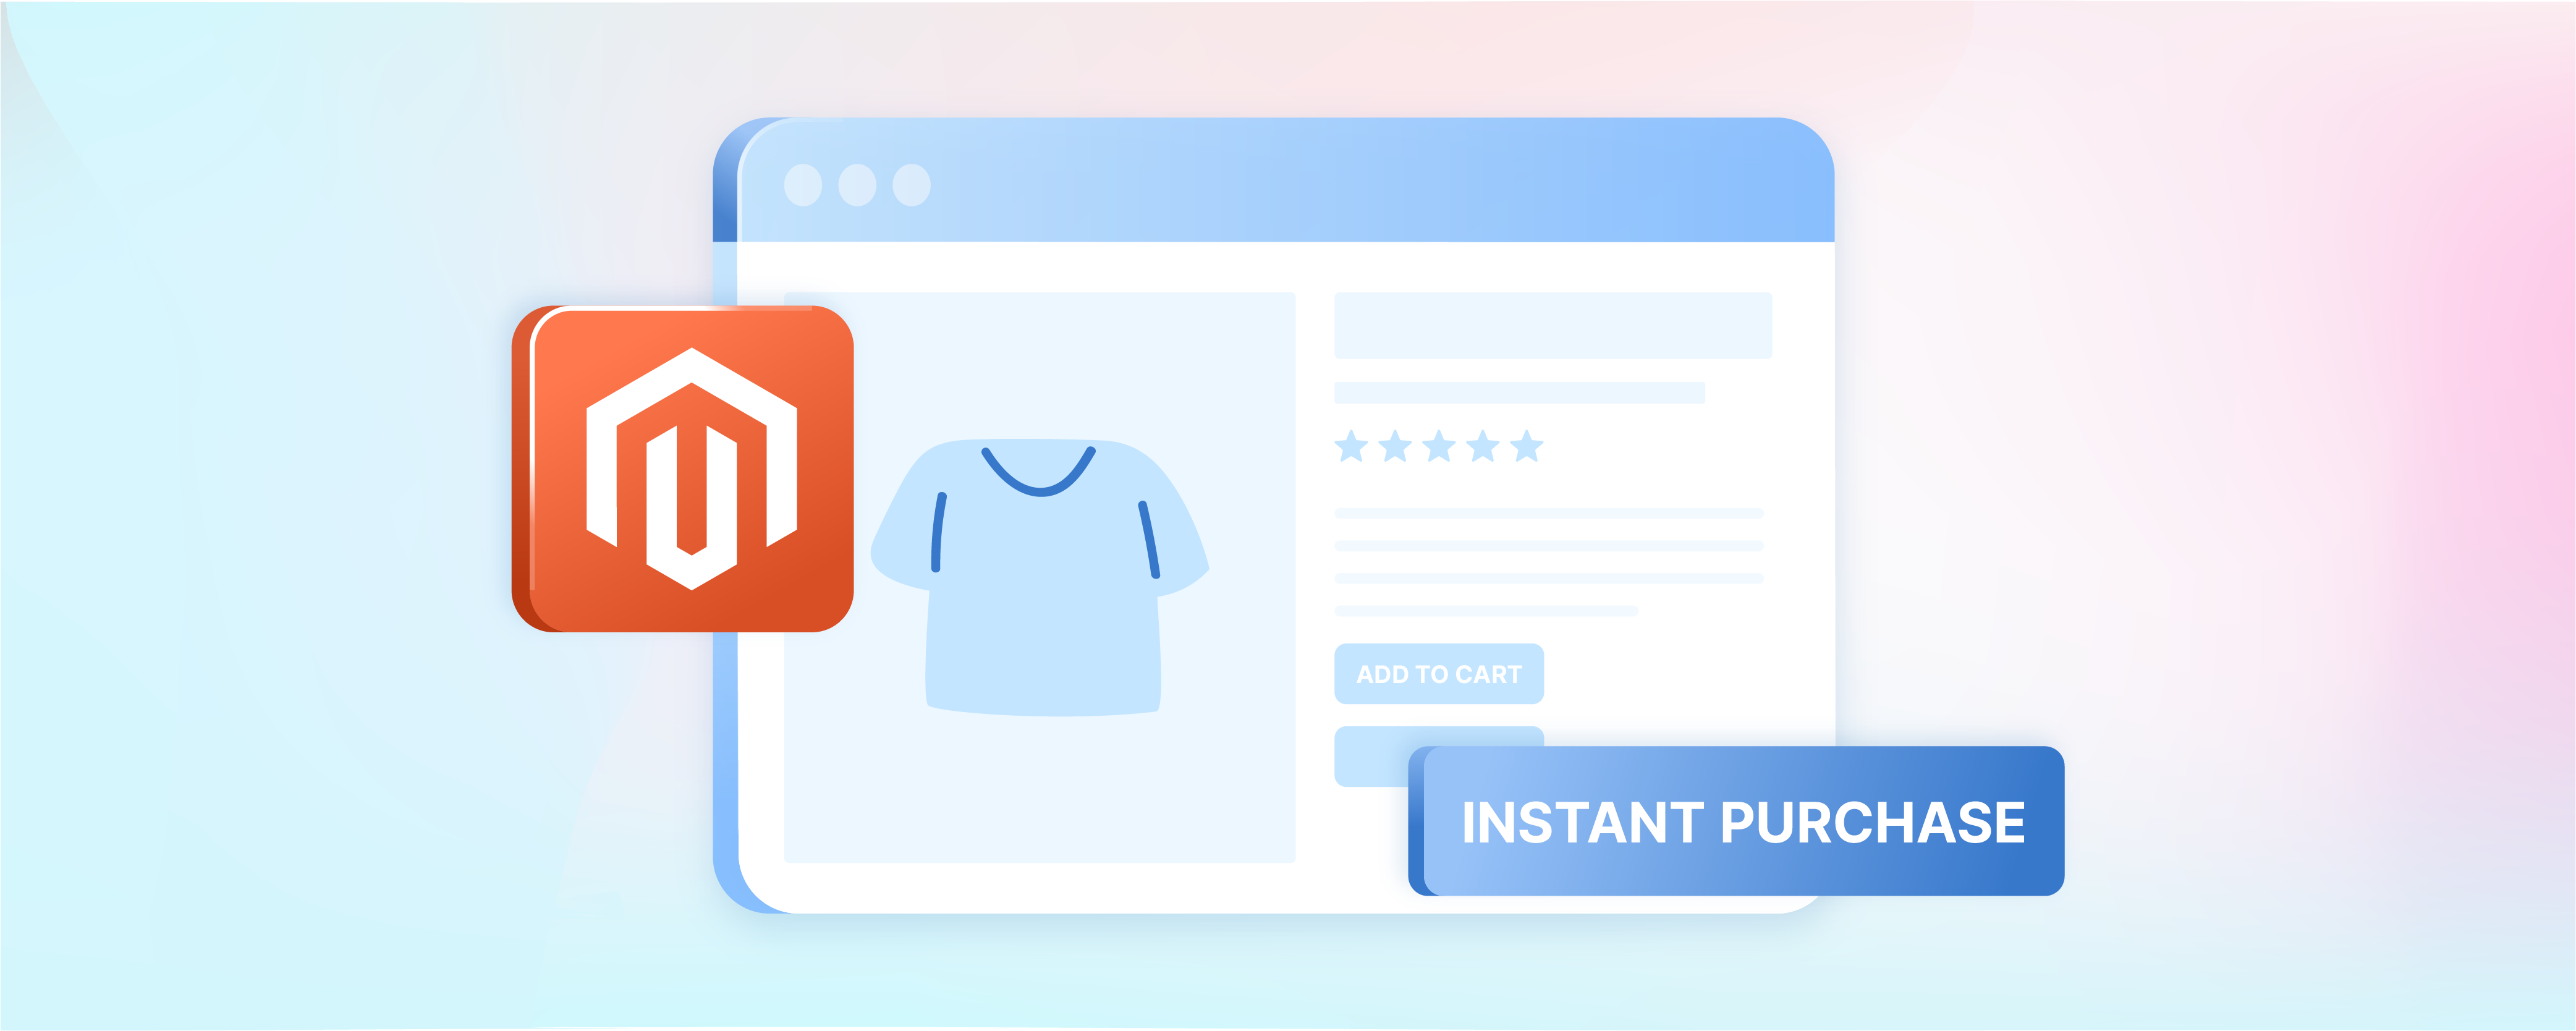 How to Configure Magento 2 Instant Purchase?